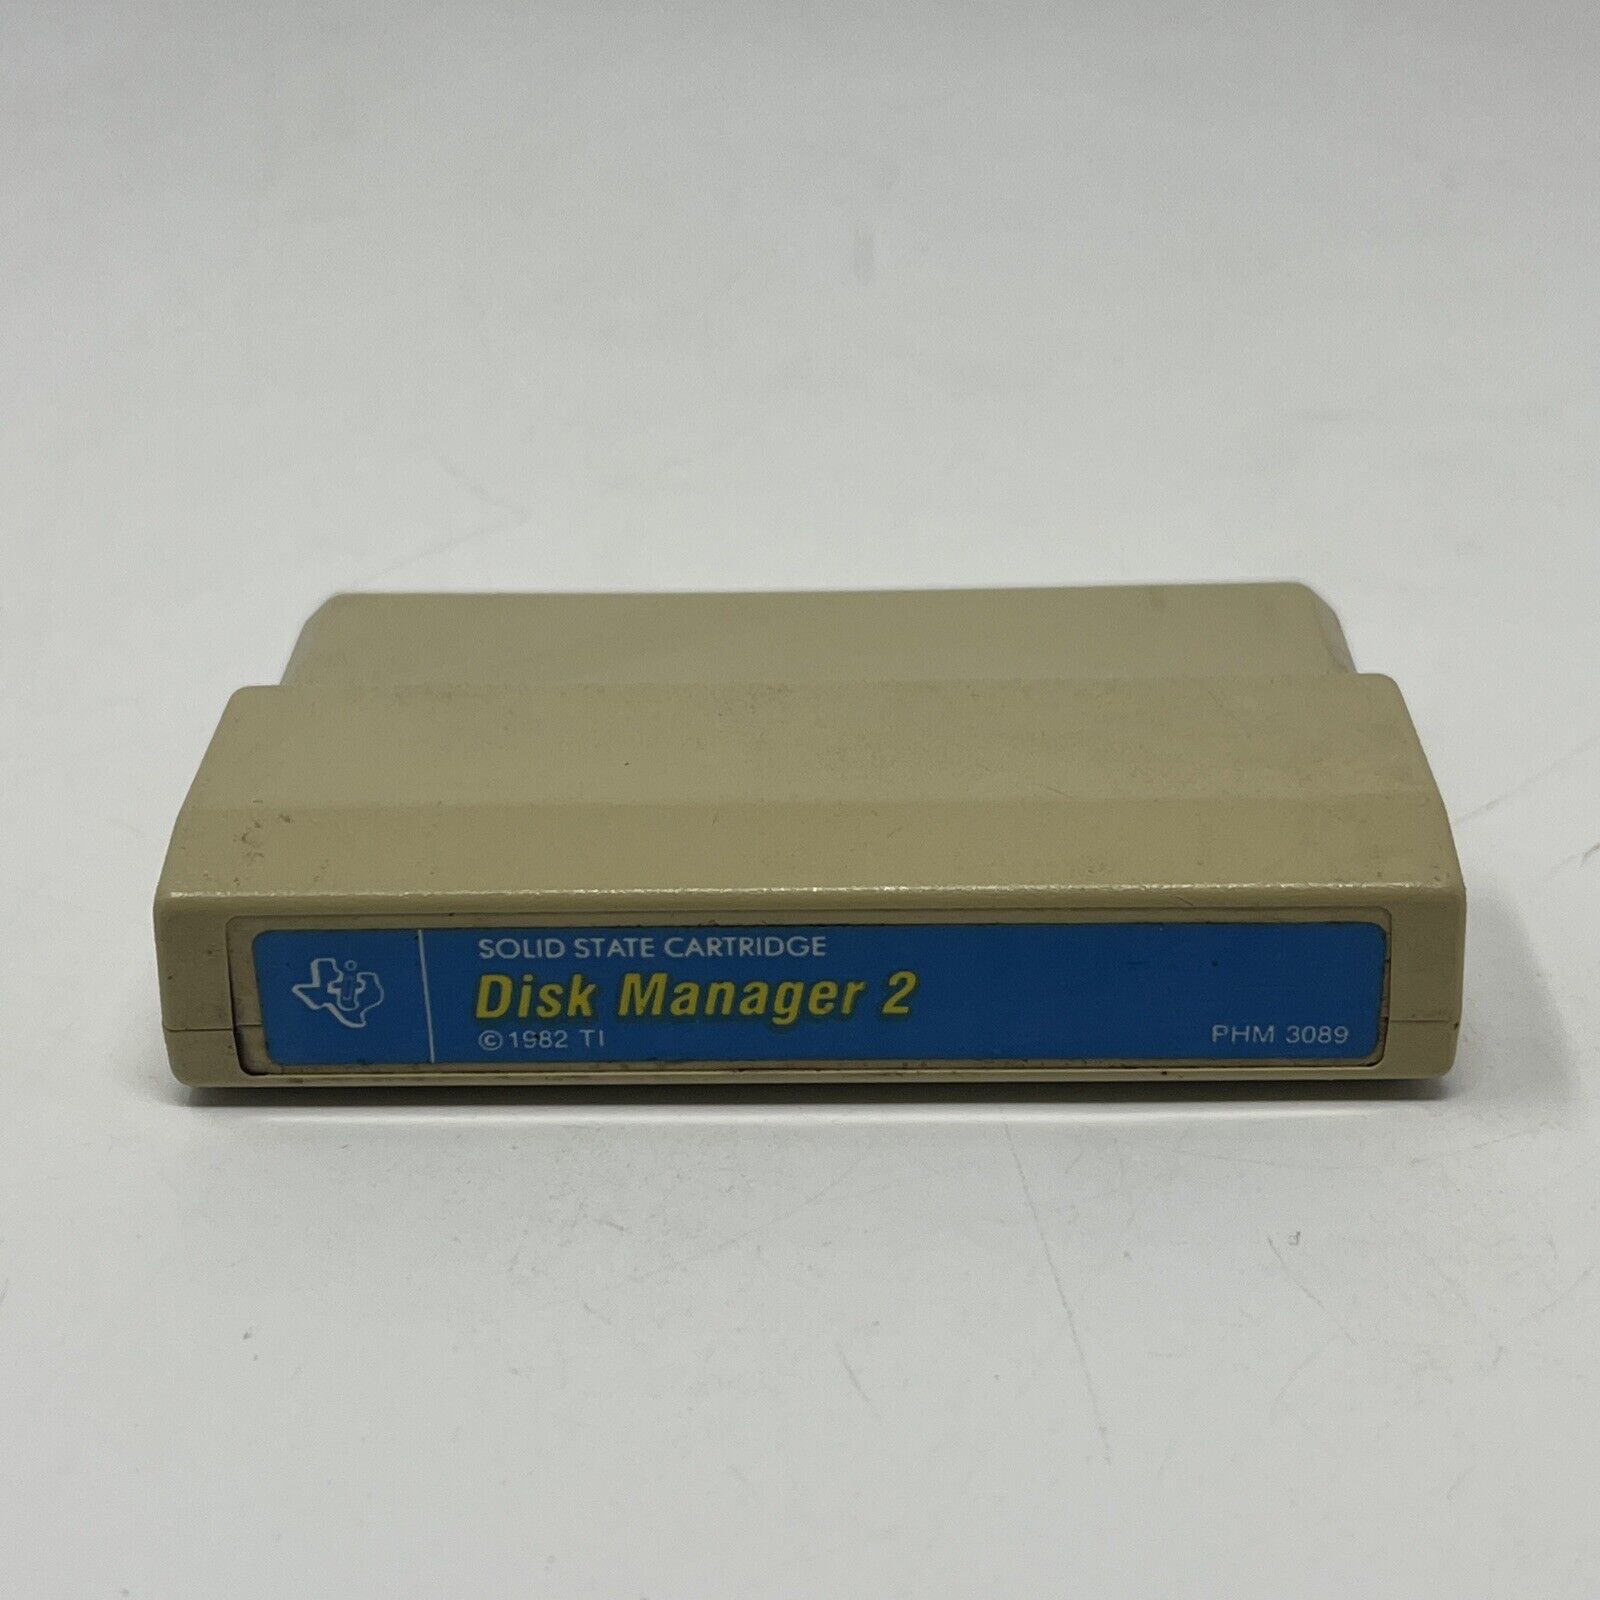 1982 Texas Instruments Disk Manager 2 PHM 3089 Solid State TI Cartridge Software